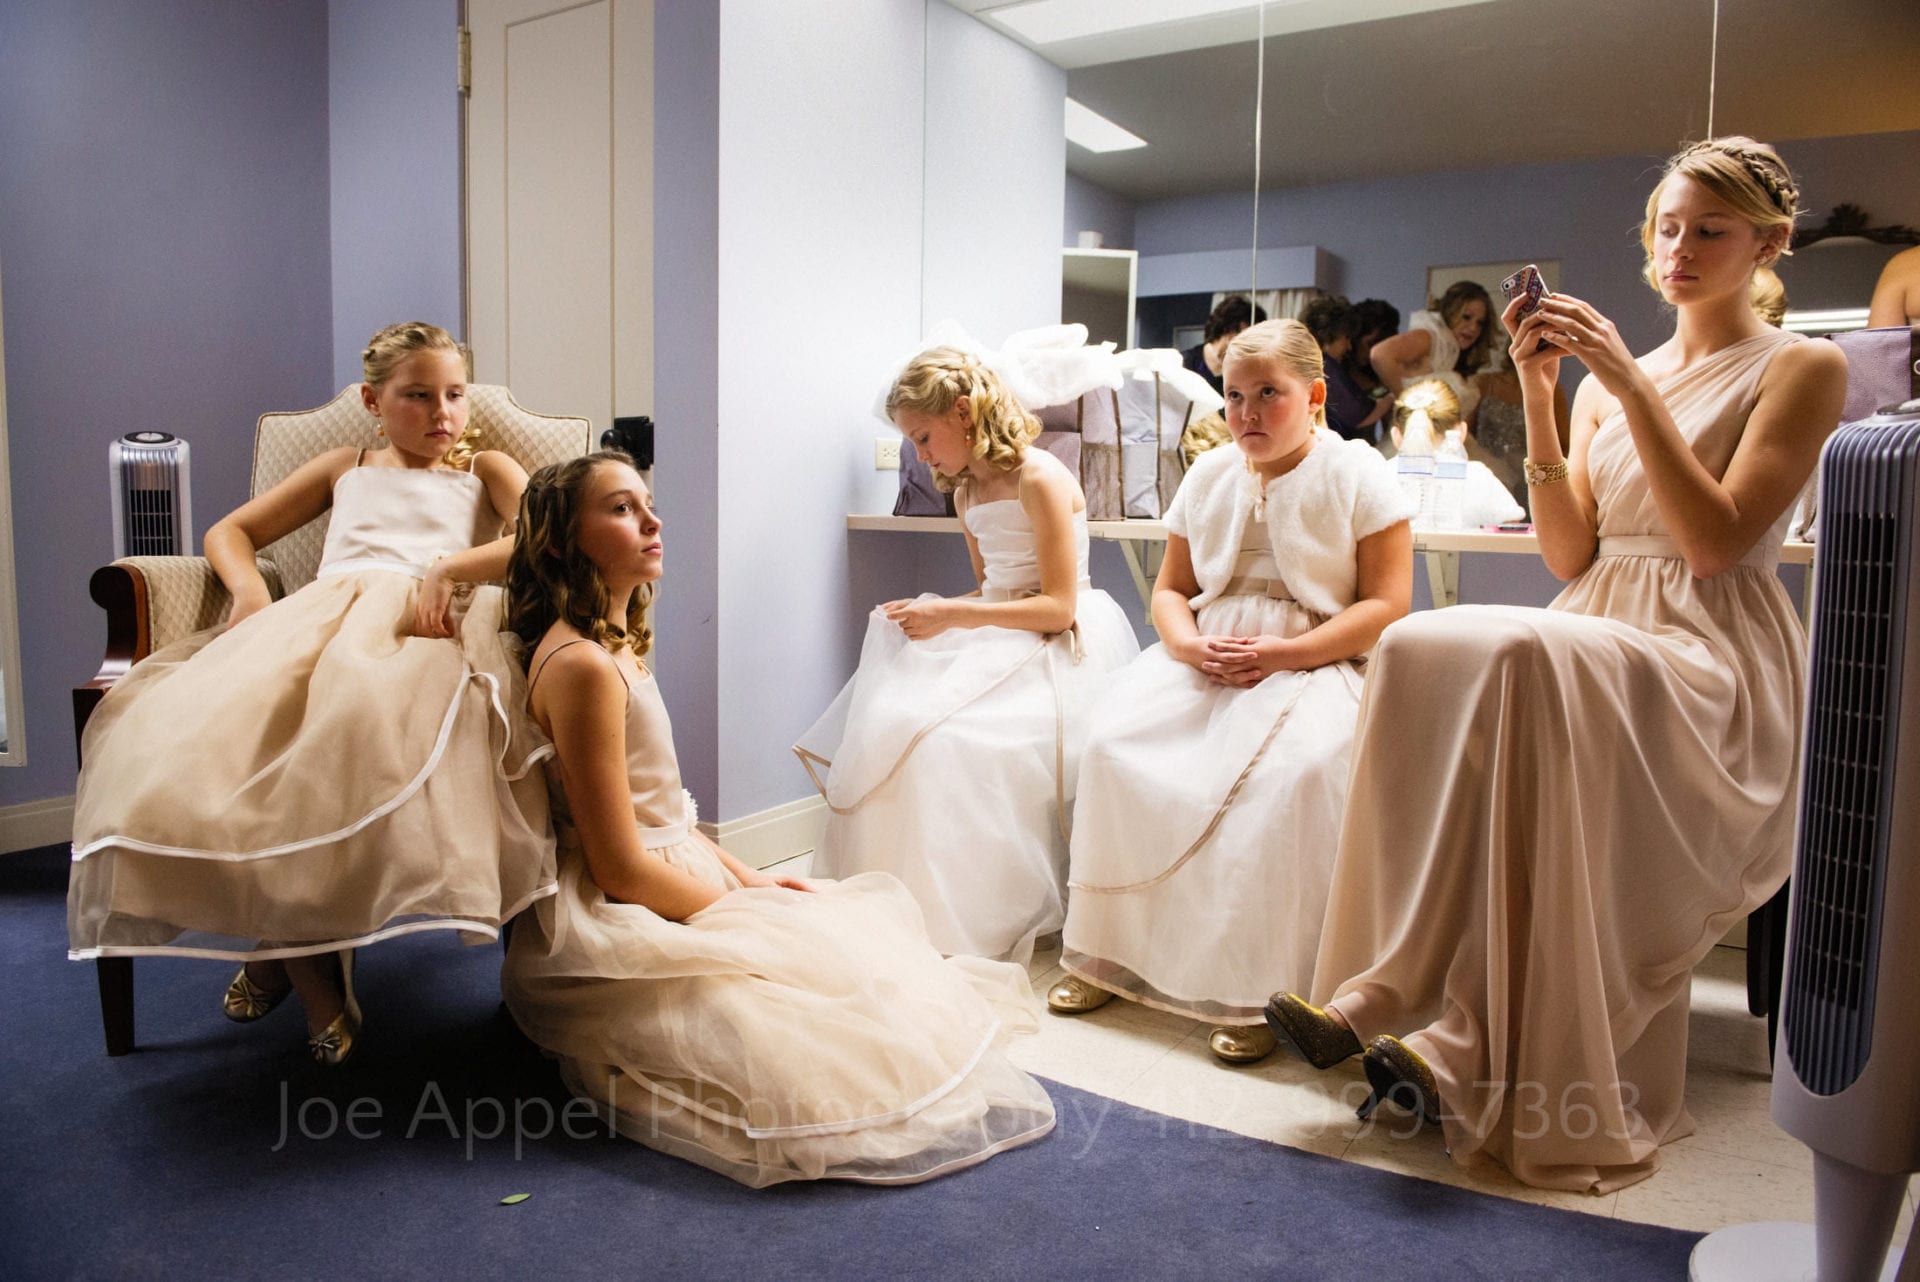 A group of young girls wearing long dresses sit in a lavender waiting room with a mirror behind them.